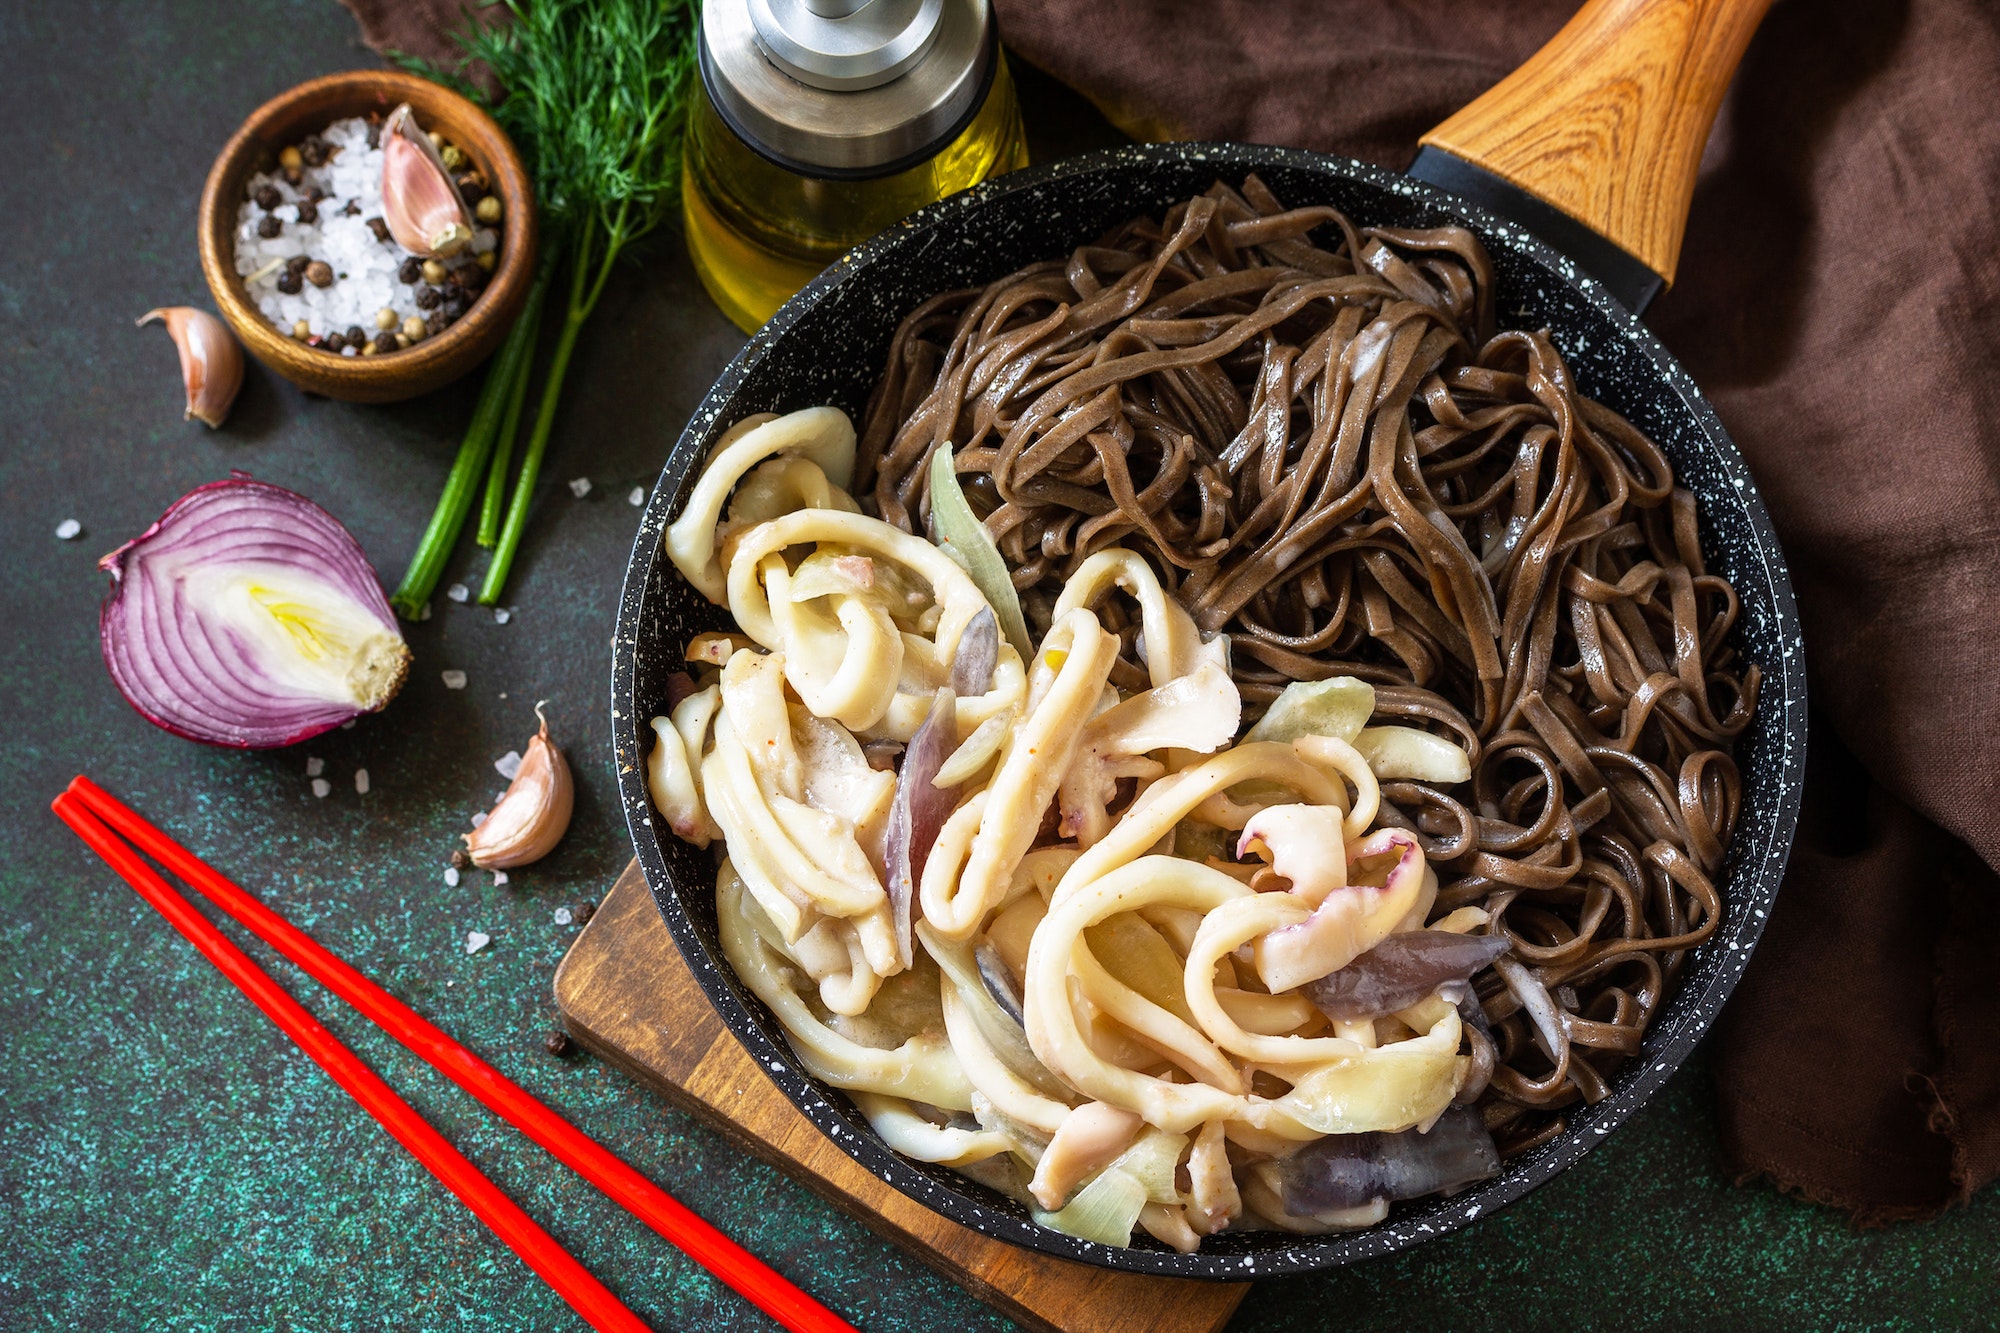 Spicy Noodles, Korean traditional food. Buckwheat soba noodles and squid with sour cream sauce.